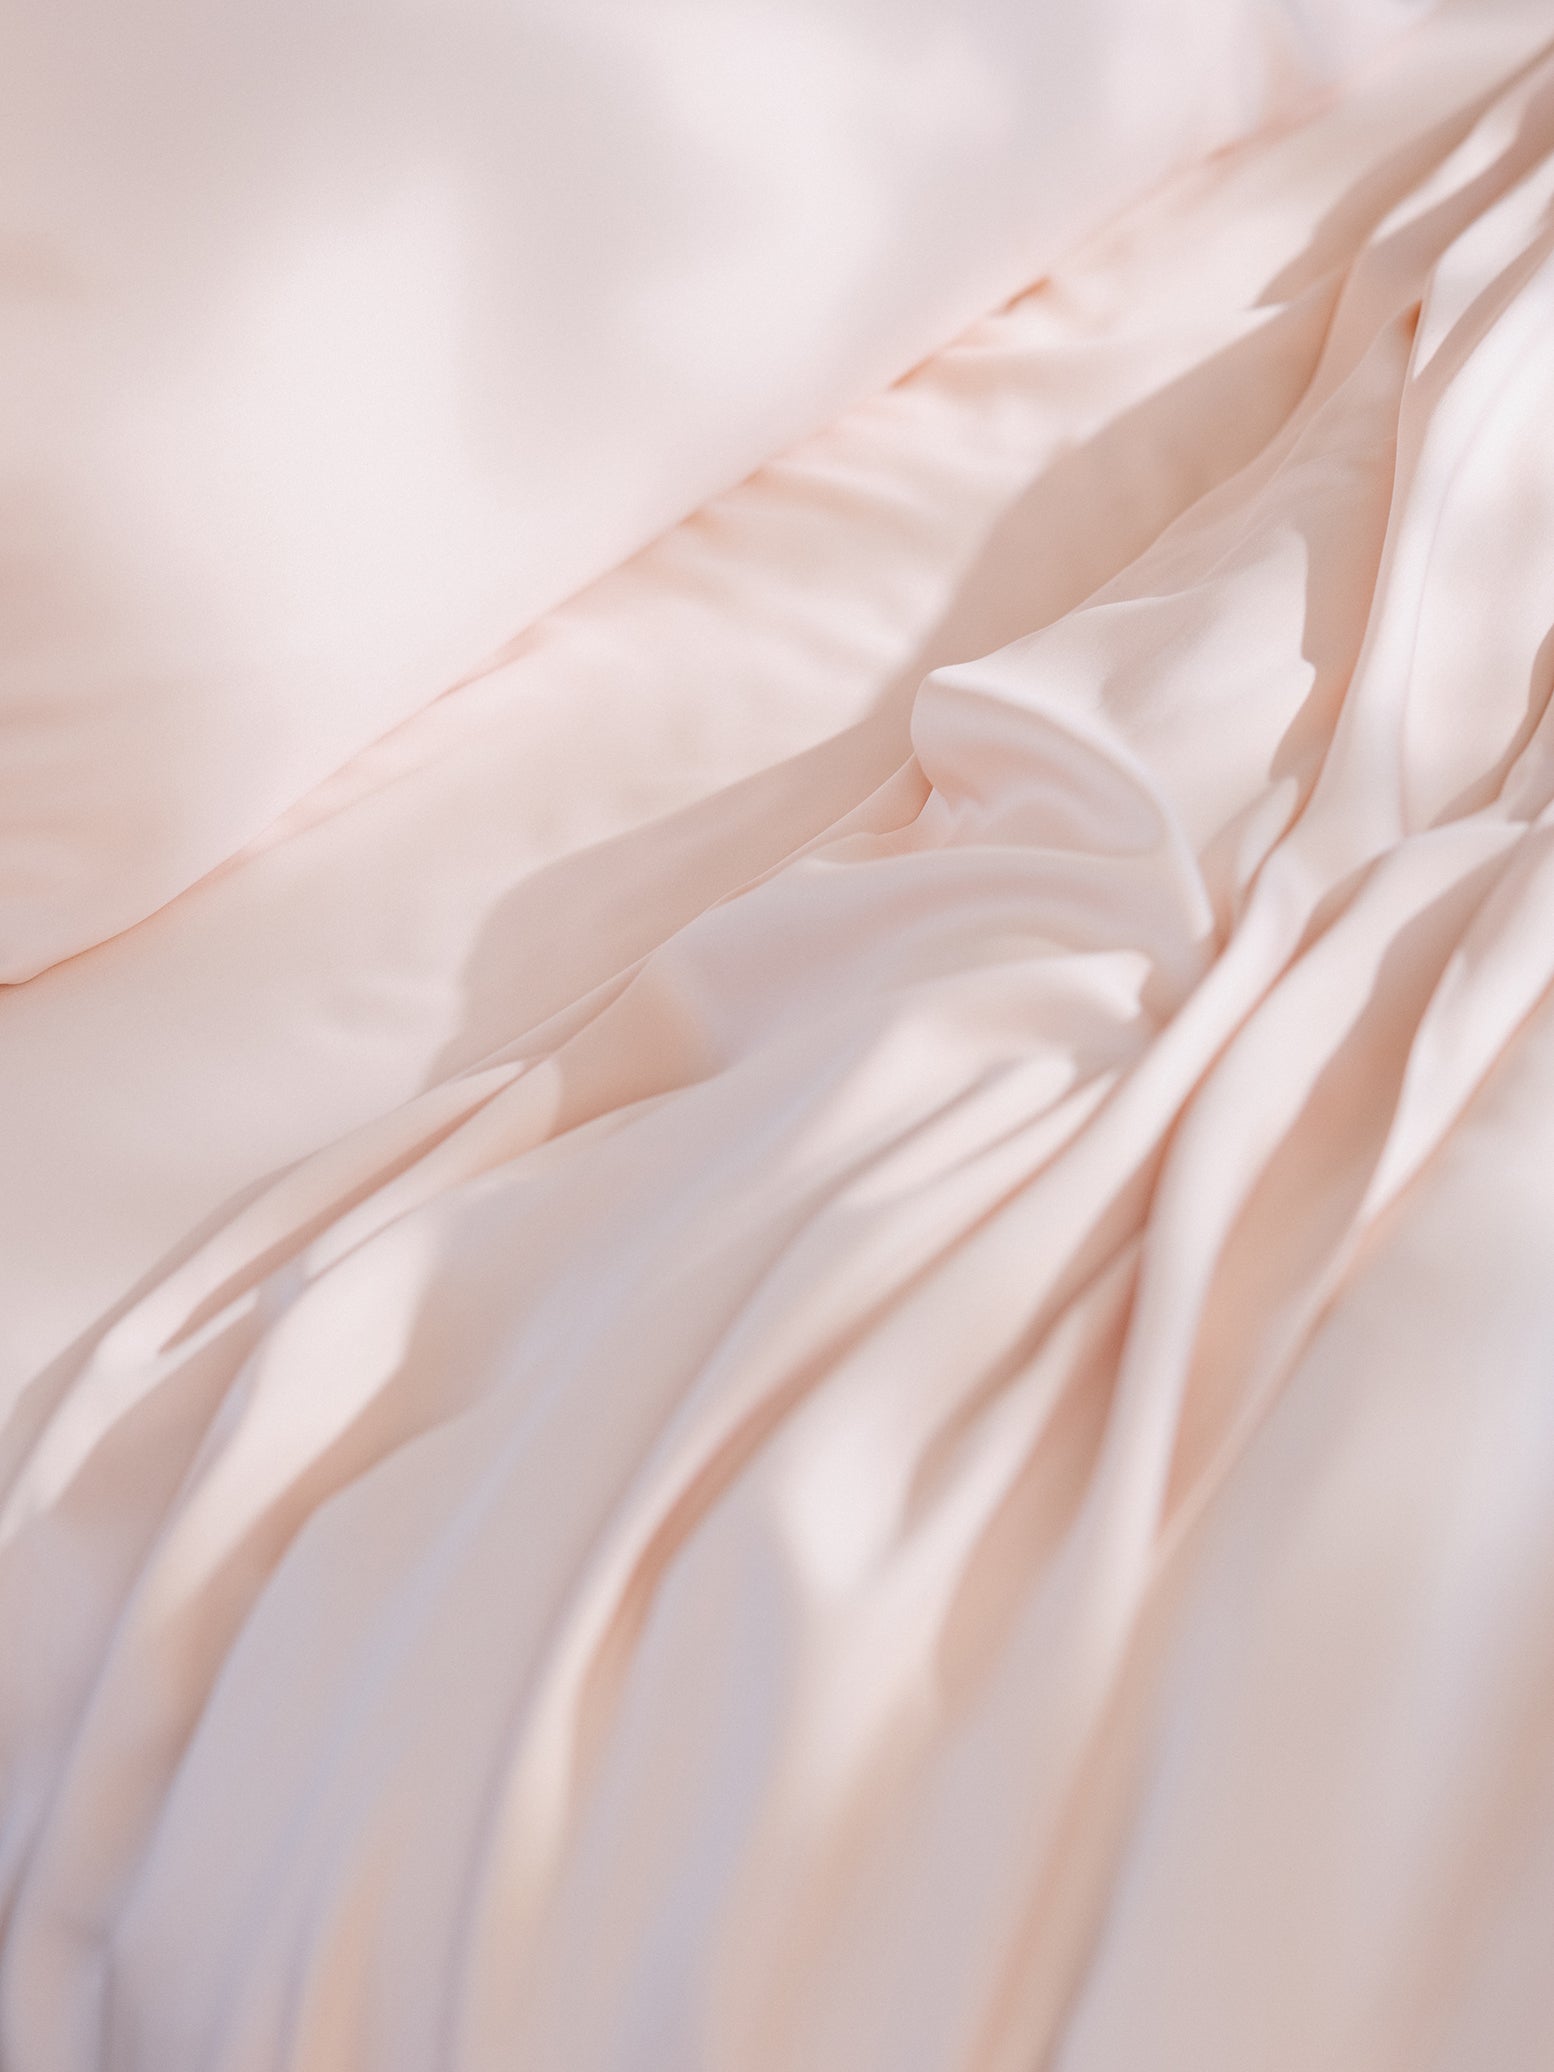 Peony Sheets on bed. 